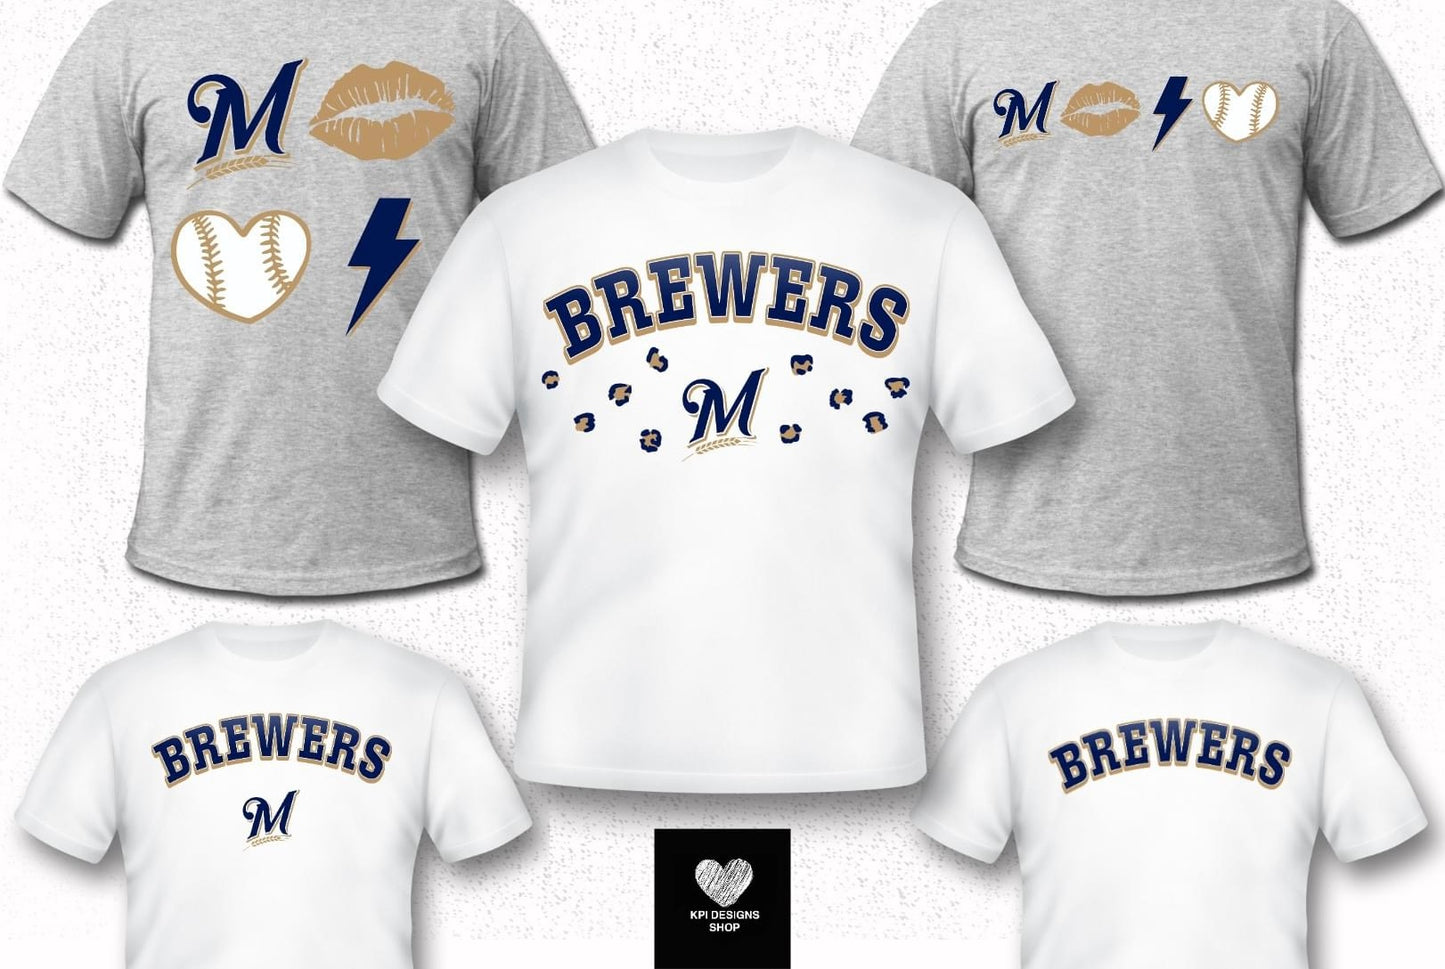 Brewers MLB Collection (KPI): *DTF* Transfer